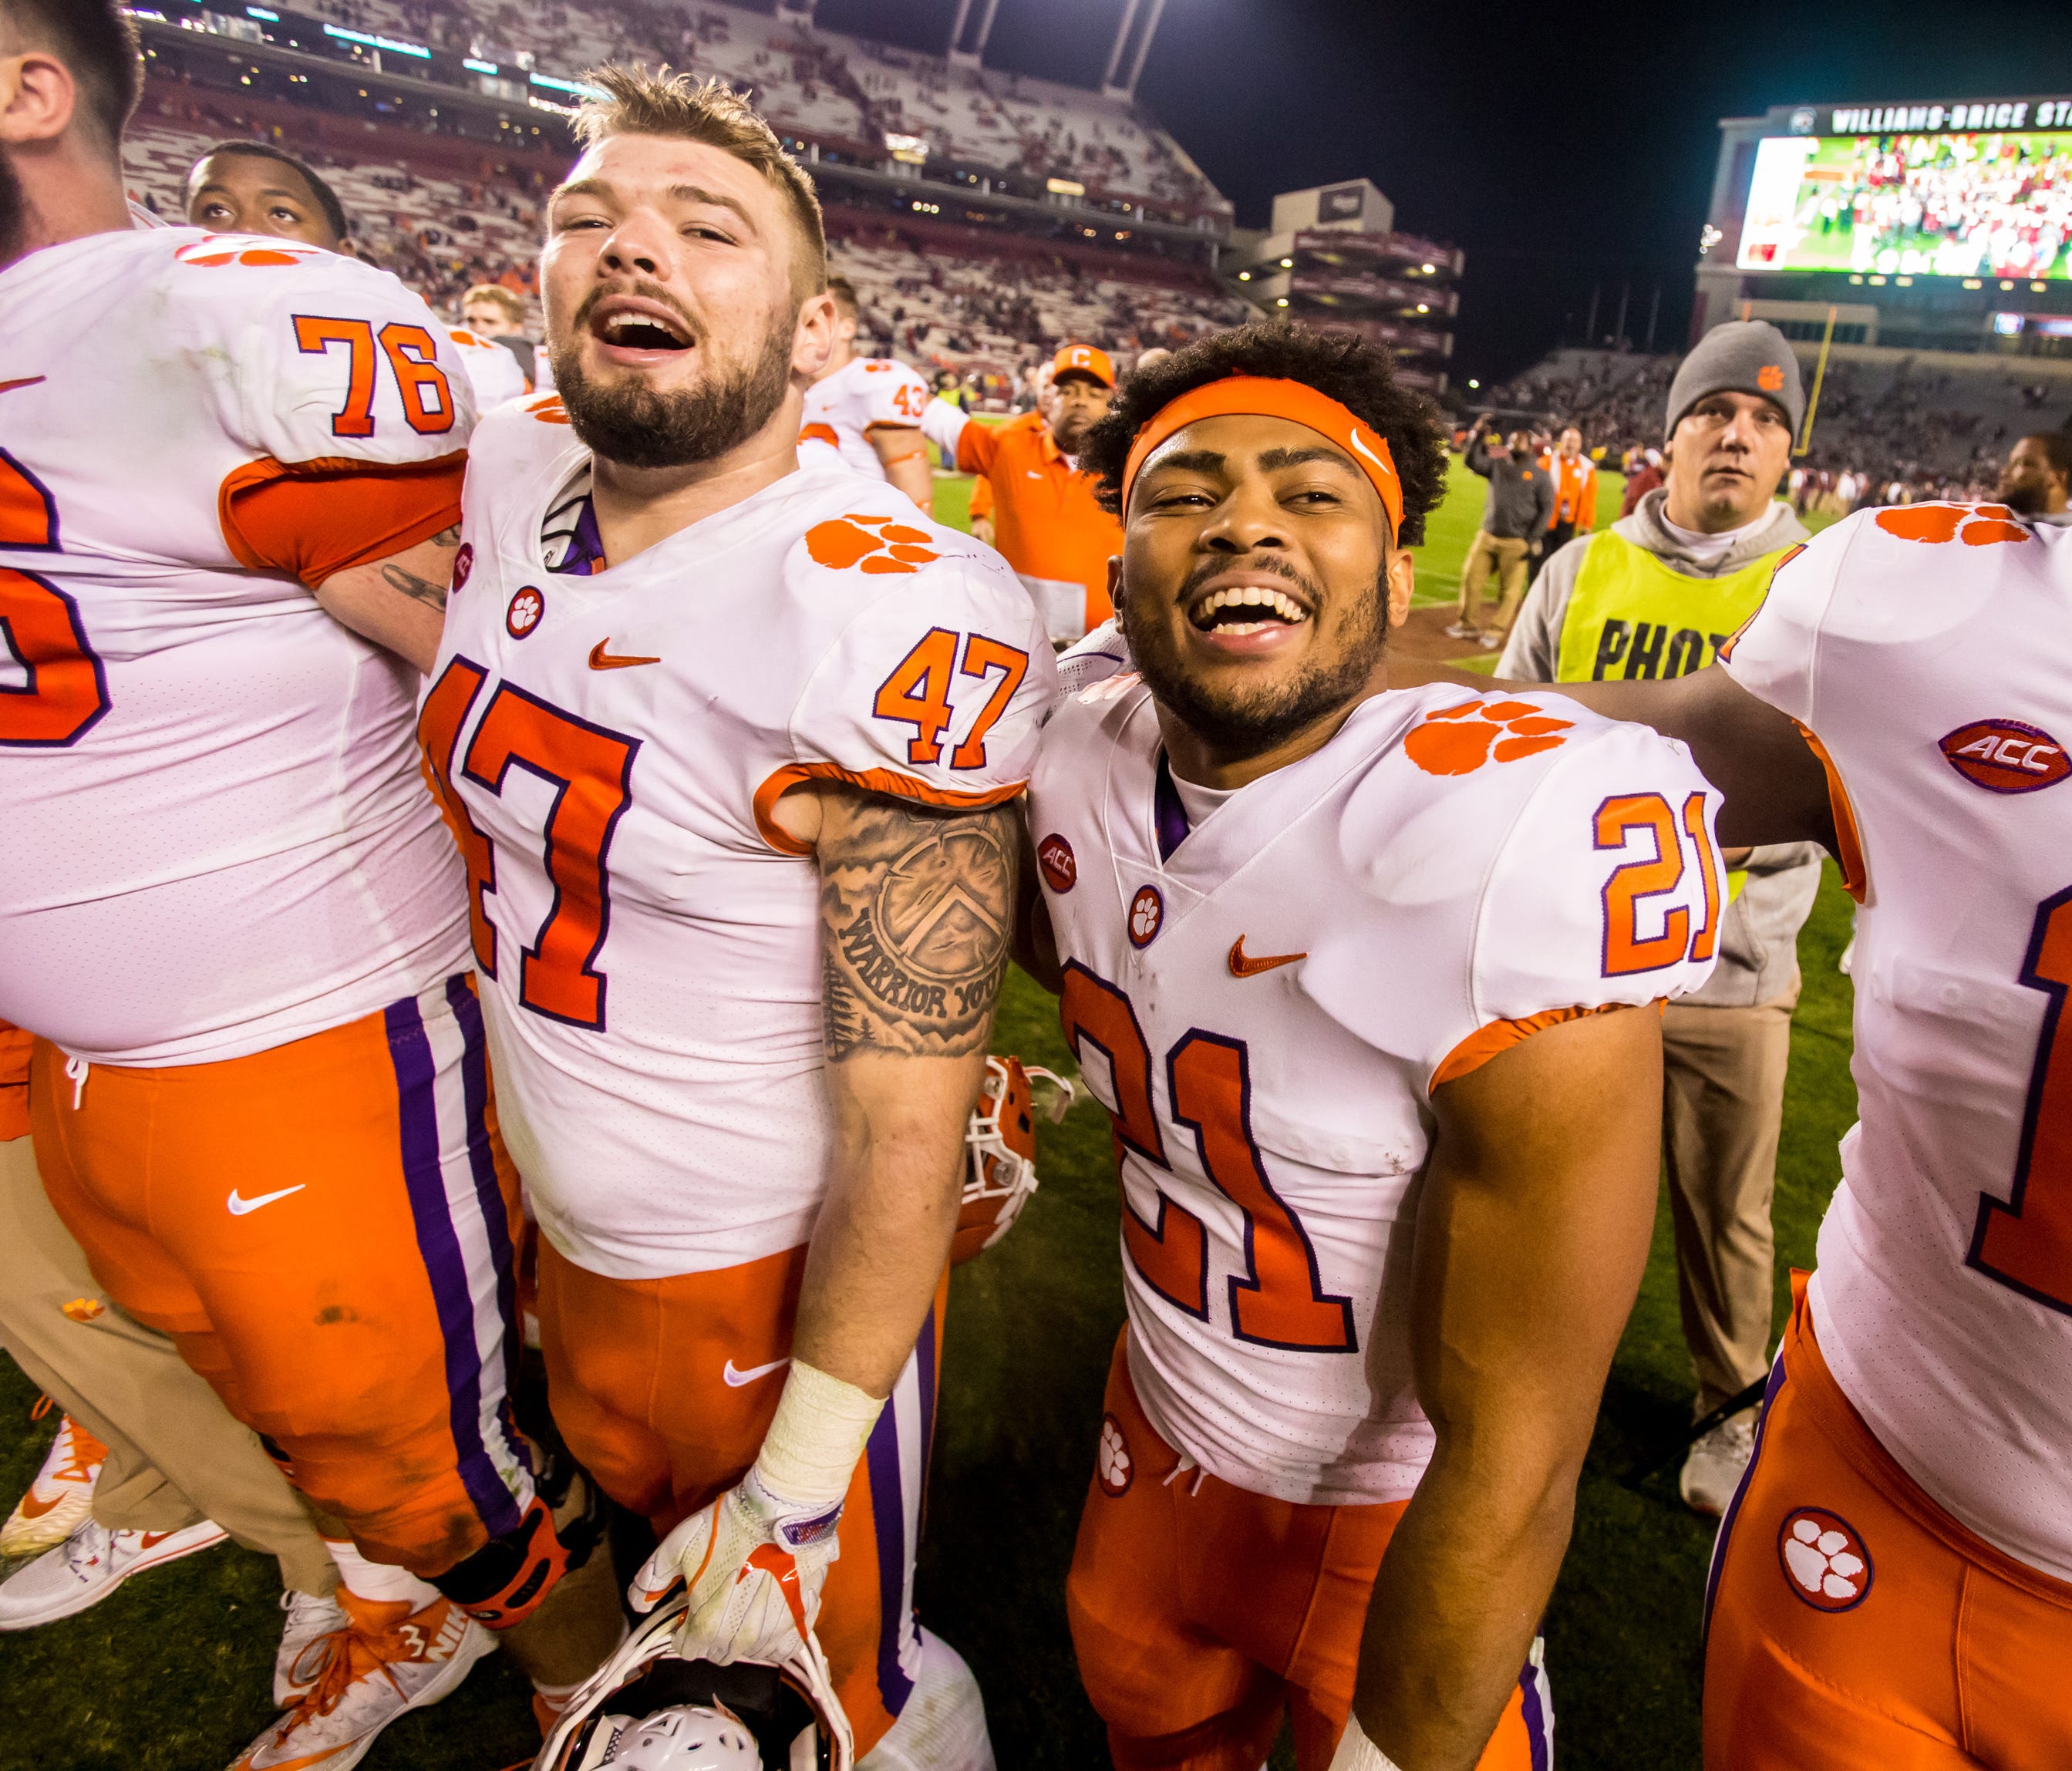 Clemson players celebrate following their win over the South Carolina at Williams-Brice Stadium.